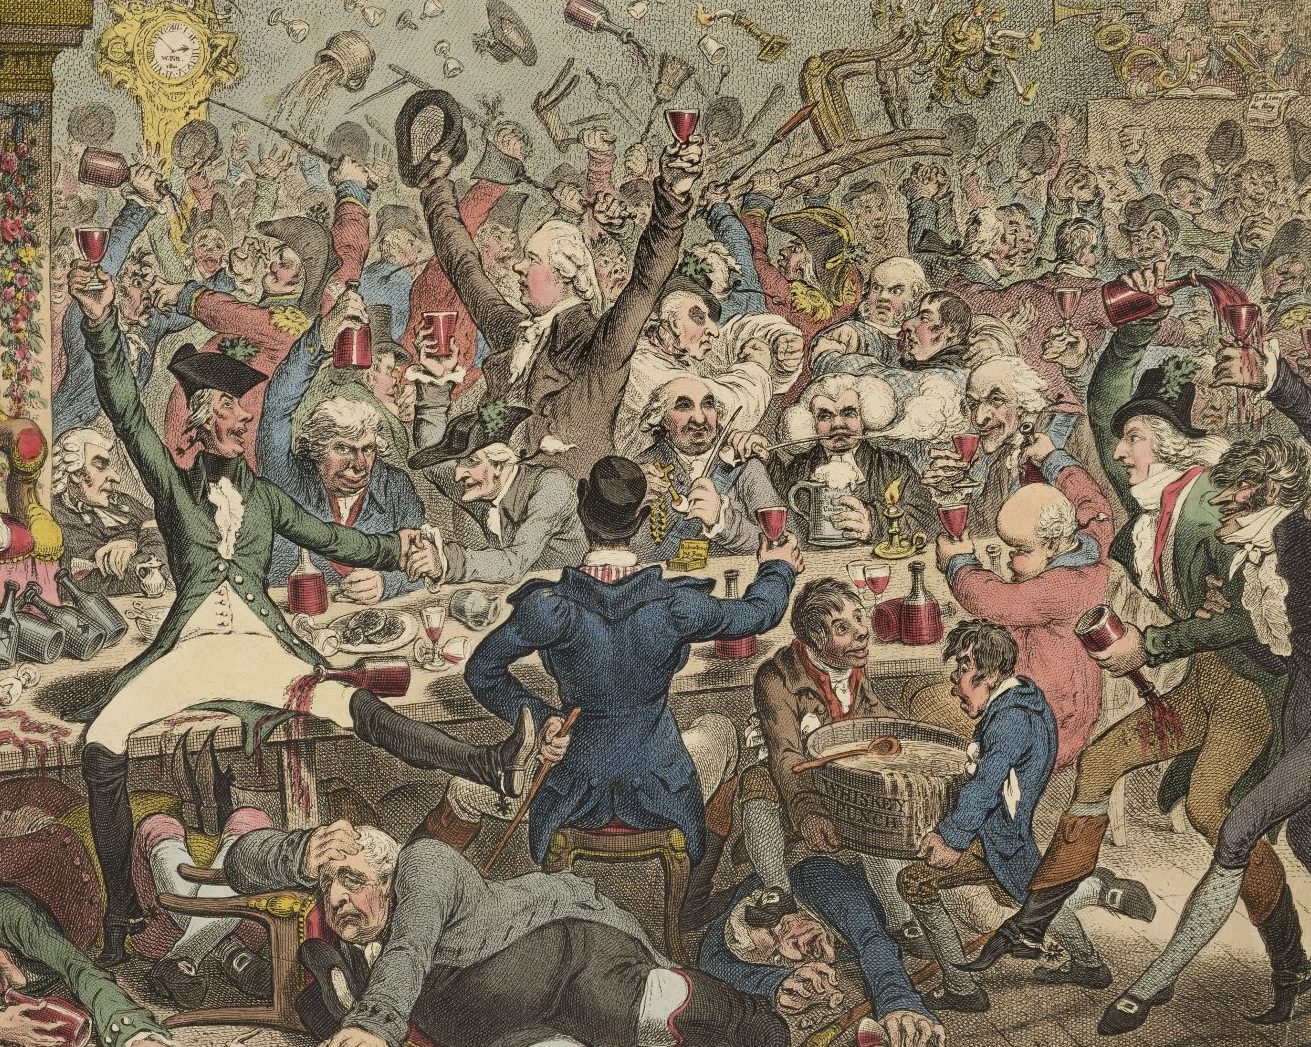 A print by James Gillray depicting 'The Union Club'.